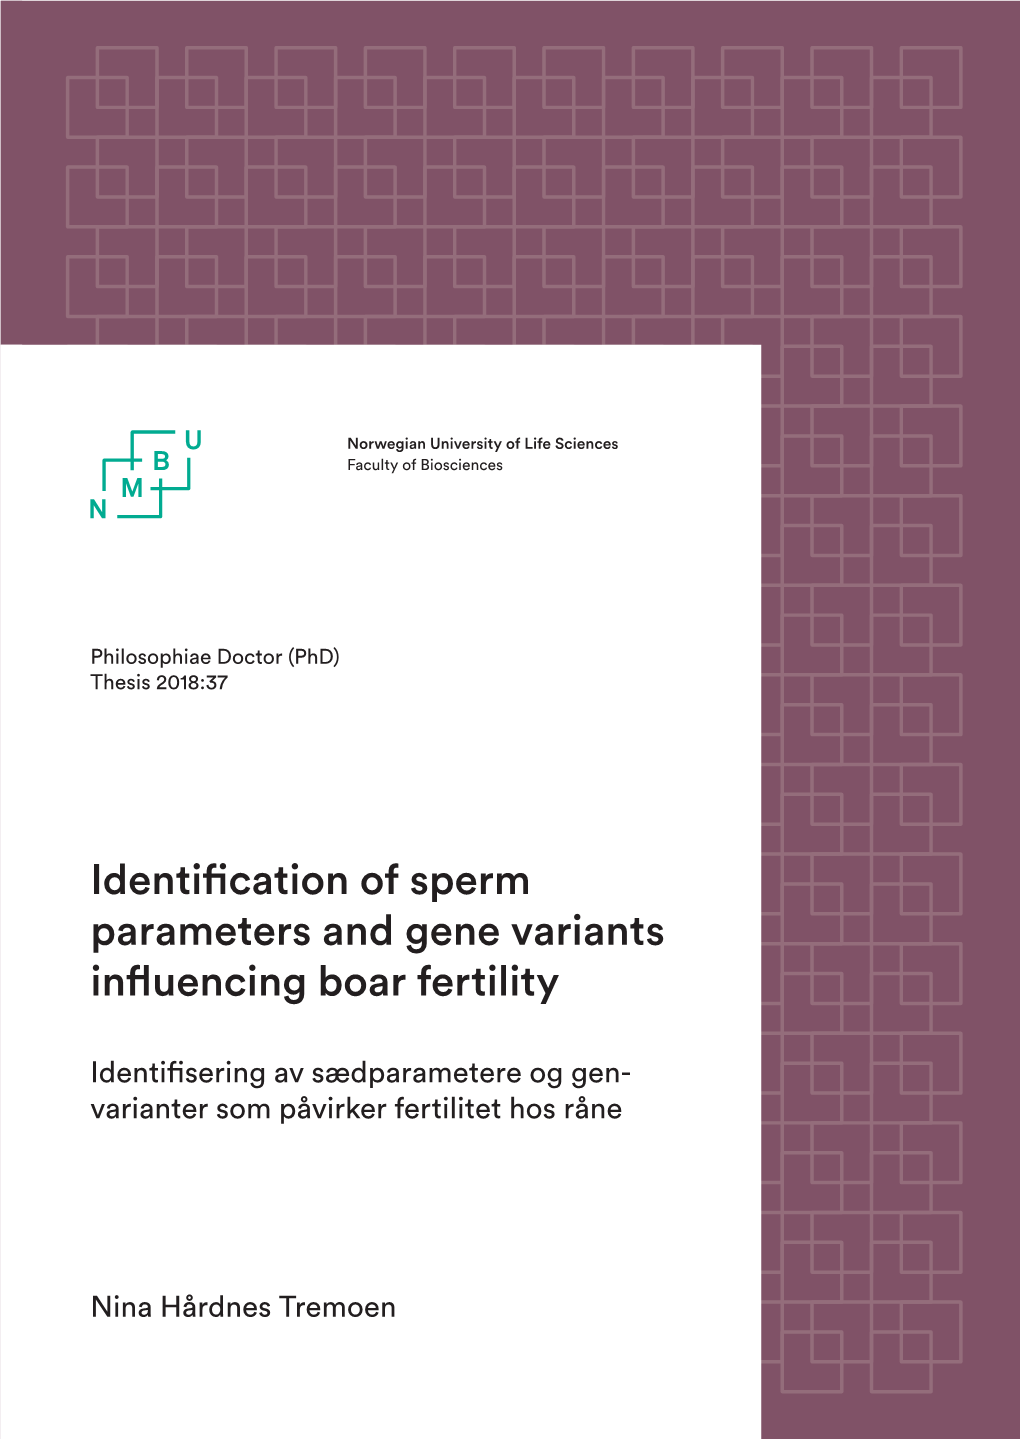 Identification of Sperm Parameters and Gene Variants Influencing Boar Fertility